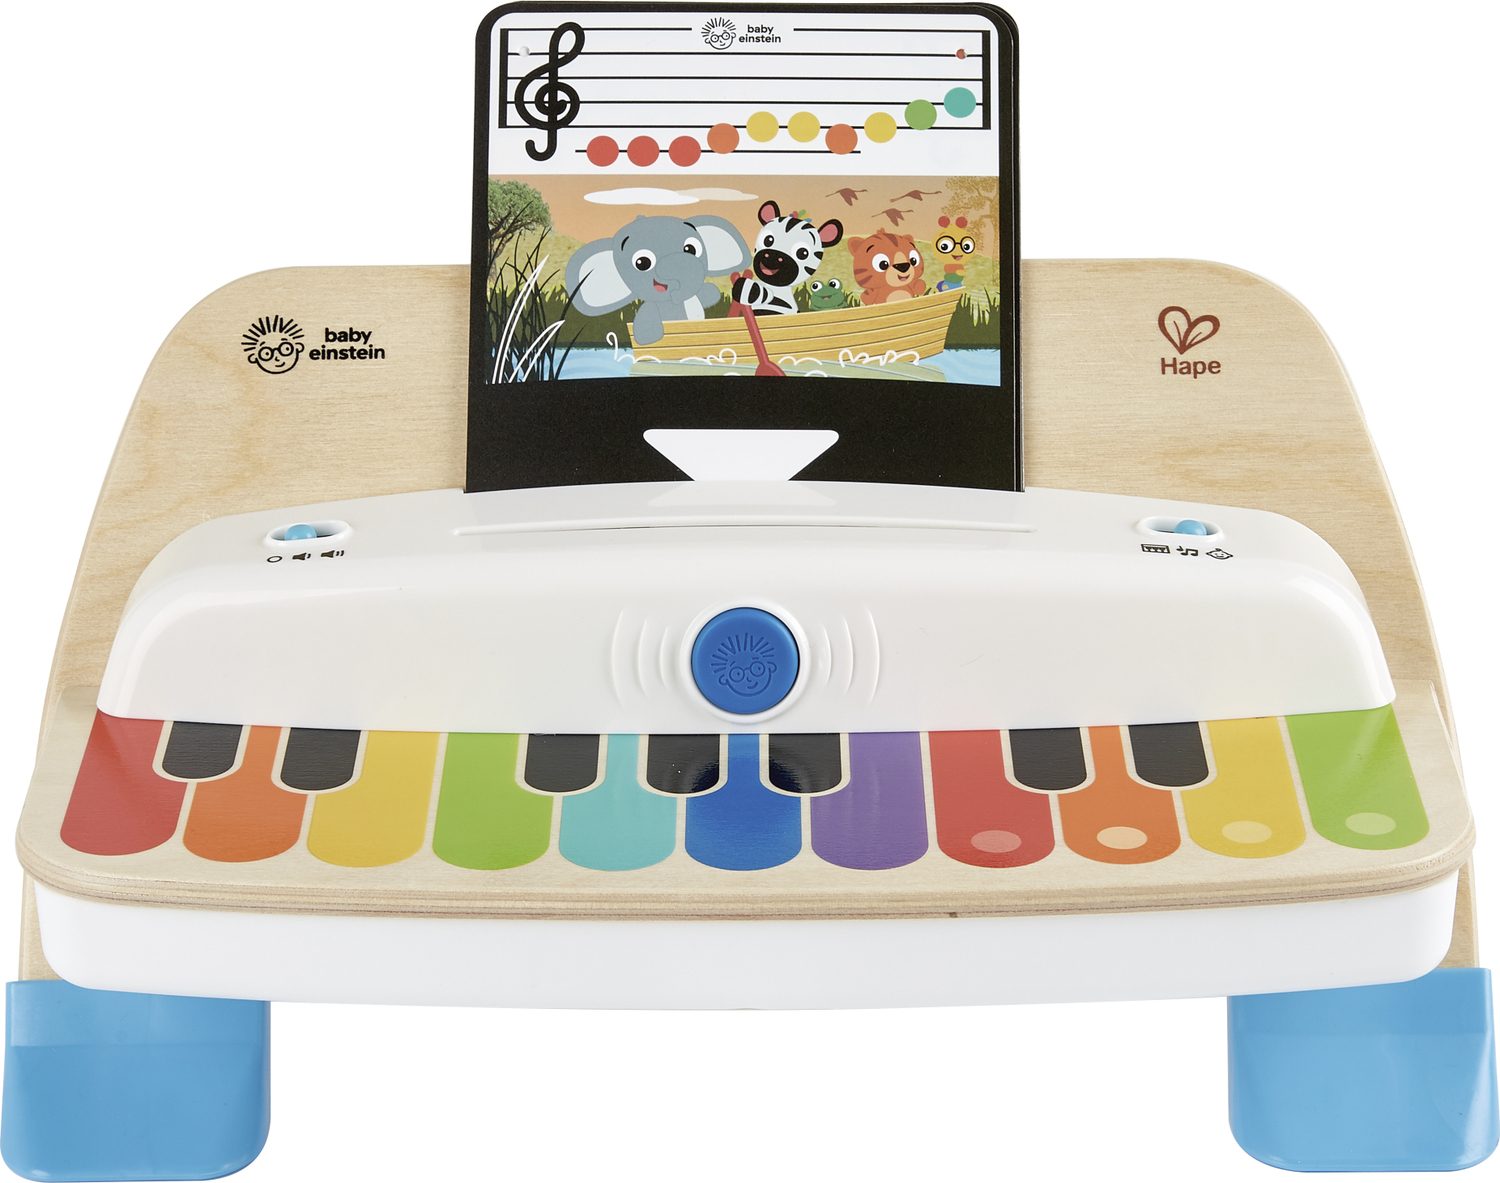 PIANO magic touch Deluxe - Jeux, Rêves & Jouets THONON